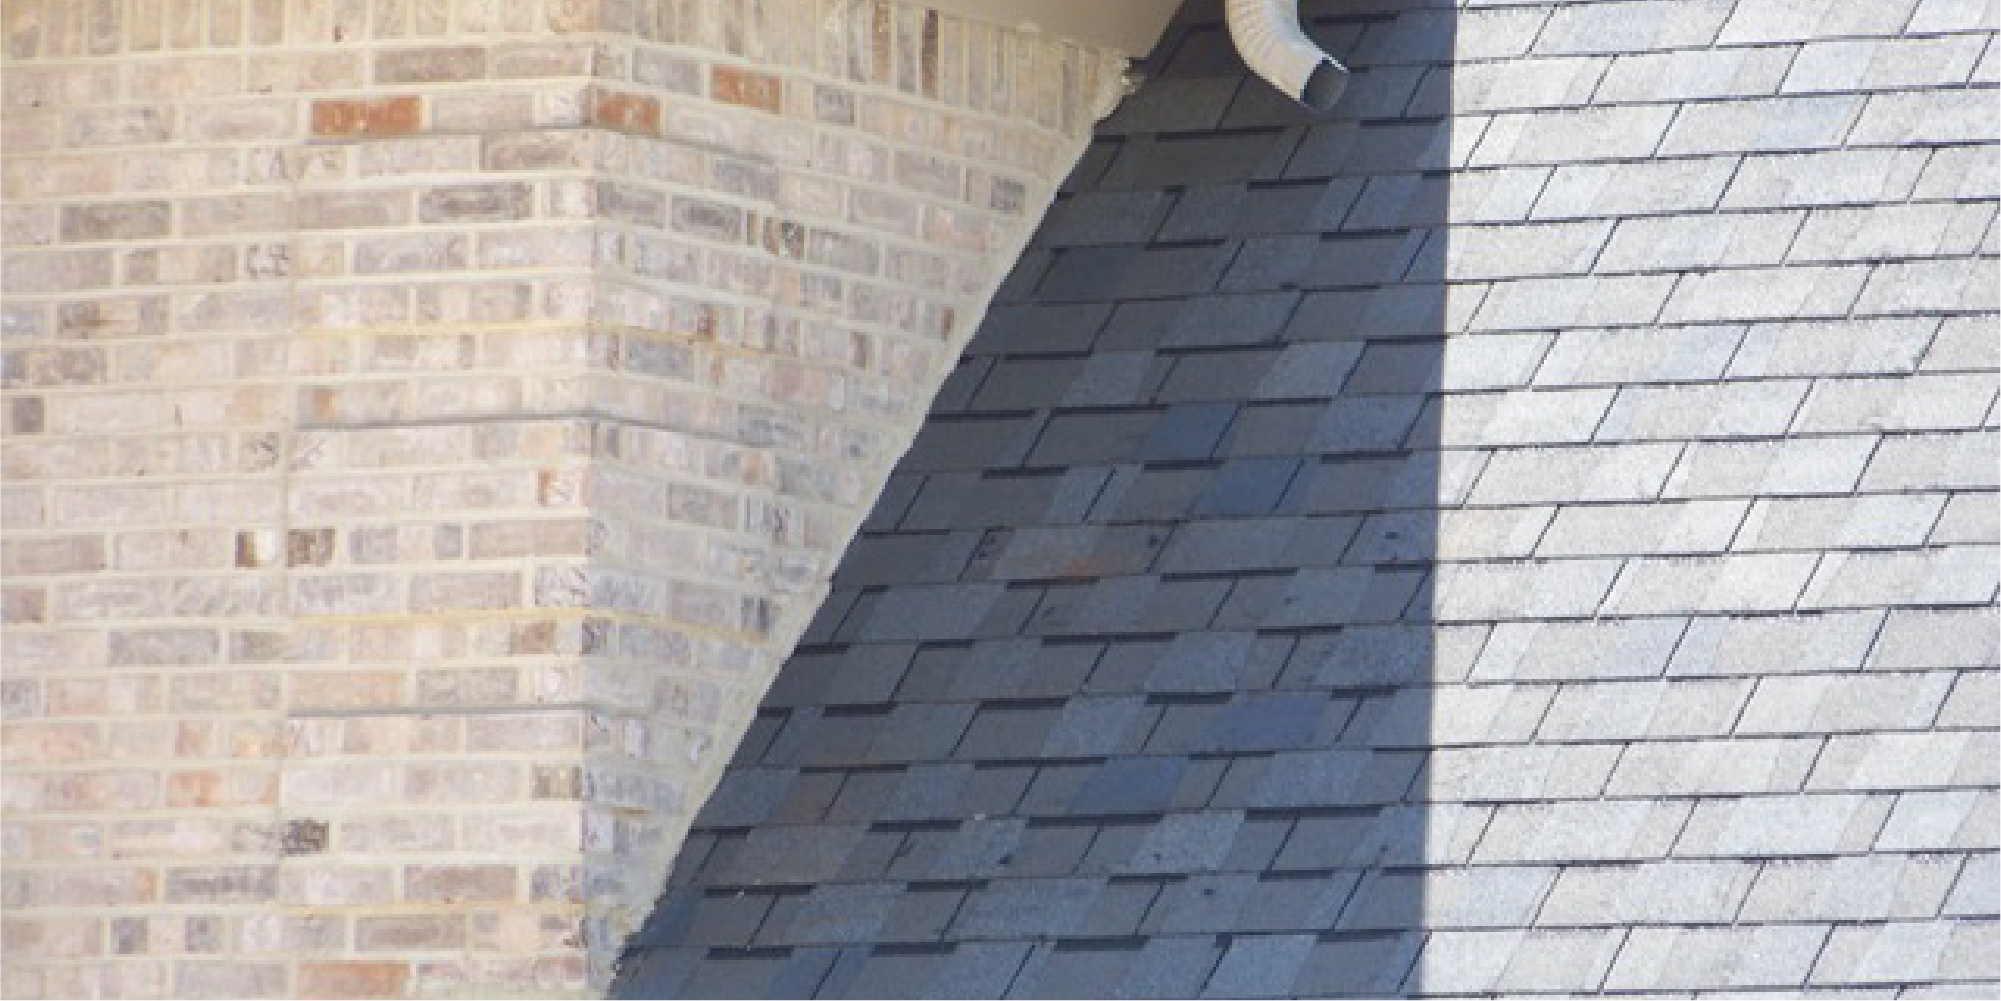 Image of roof meeting with a brick wall without the proper roof flashing